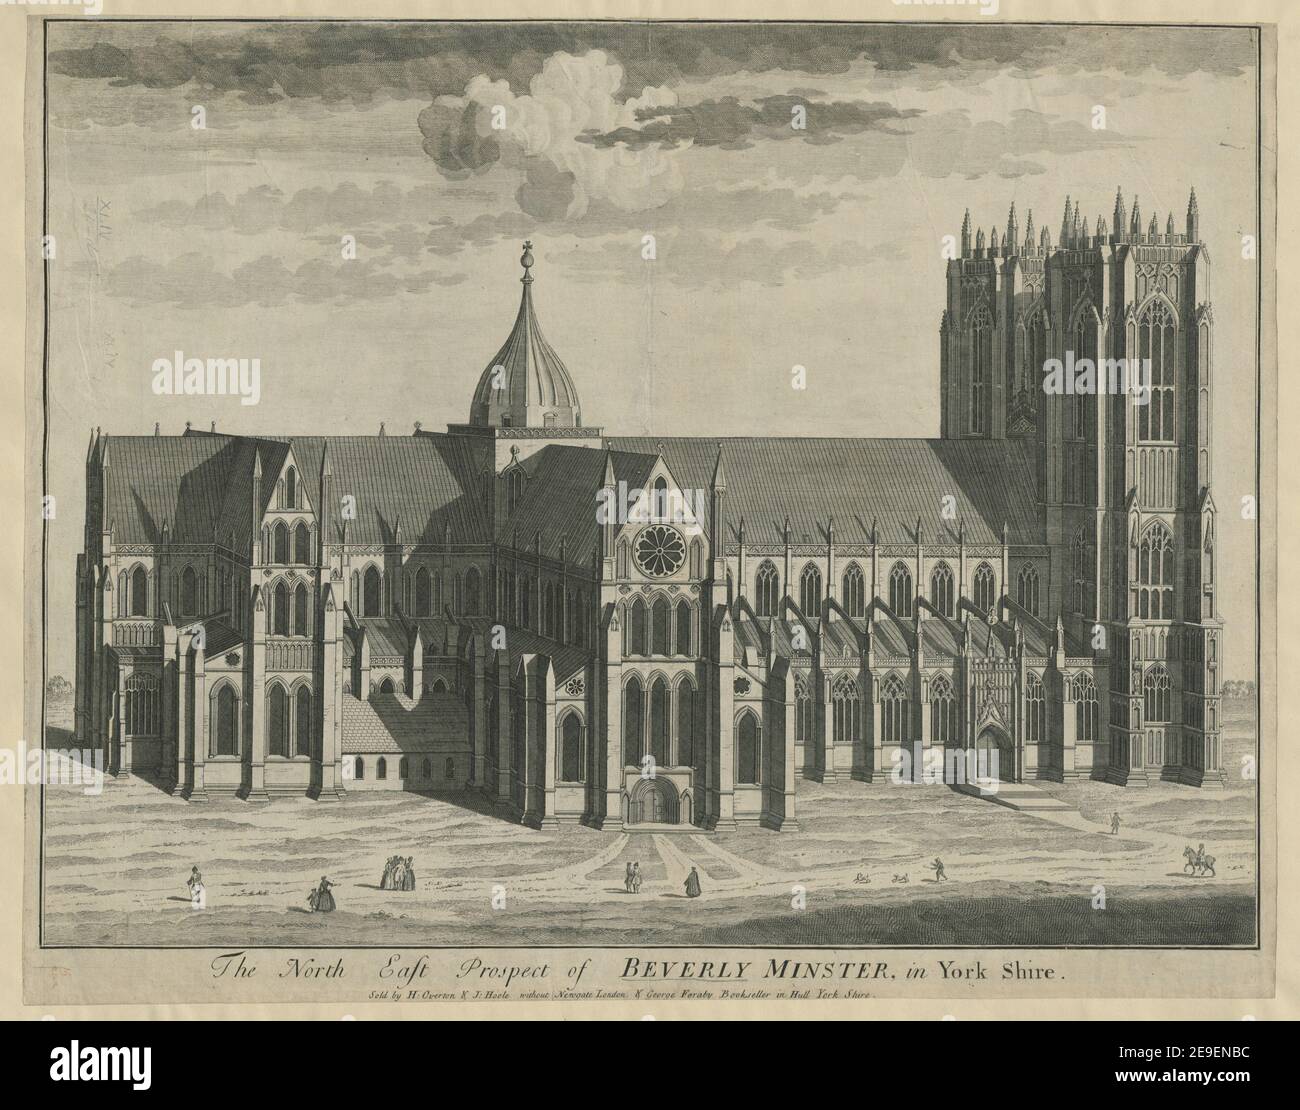 The North East Prospect of BEVERLEY MINSTER, in York Shire. Visual Material information:  Title: The North East Prospect of BEVERLEY MINSTER, in York Shire. 44.26.d. Place of publication: [London] Publisher: Sold by H: Overton , J. Hoole without Newgate London , George Feraby Bookseller in Hull York Shire, Date of publication: [1720s c.]  Item type: 1 print Medium: etching Dimensions: sheet 44.3 x 55.6 cm [trimmed within platemark]  Former owner: George III, King of Great Britain, 1738-1820 Stock Photo